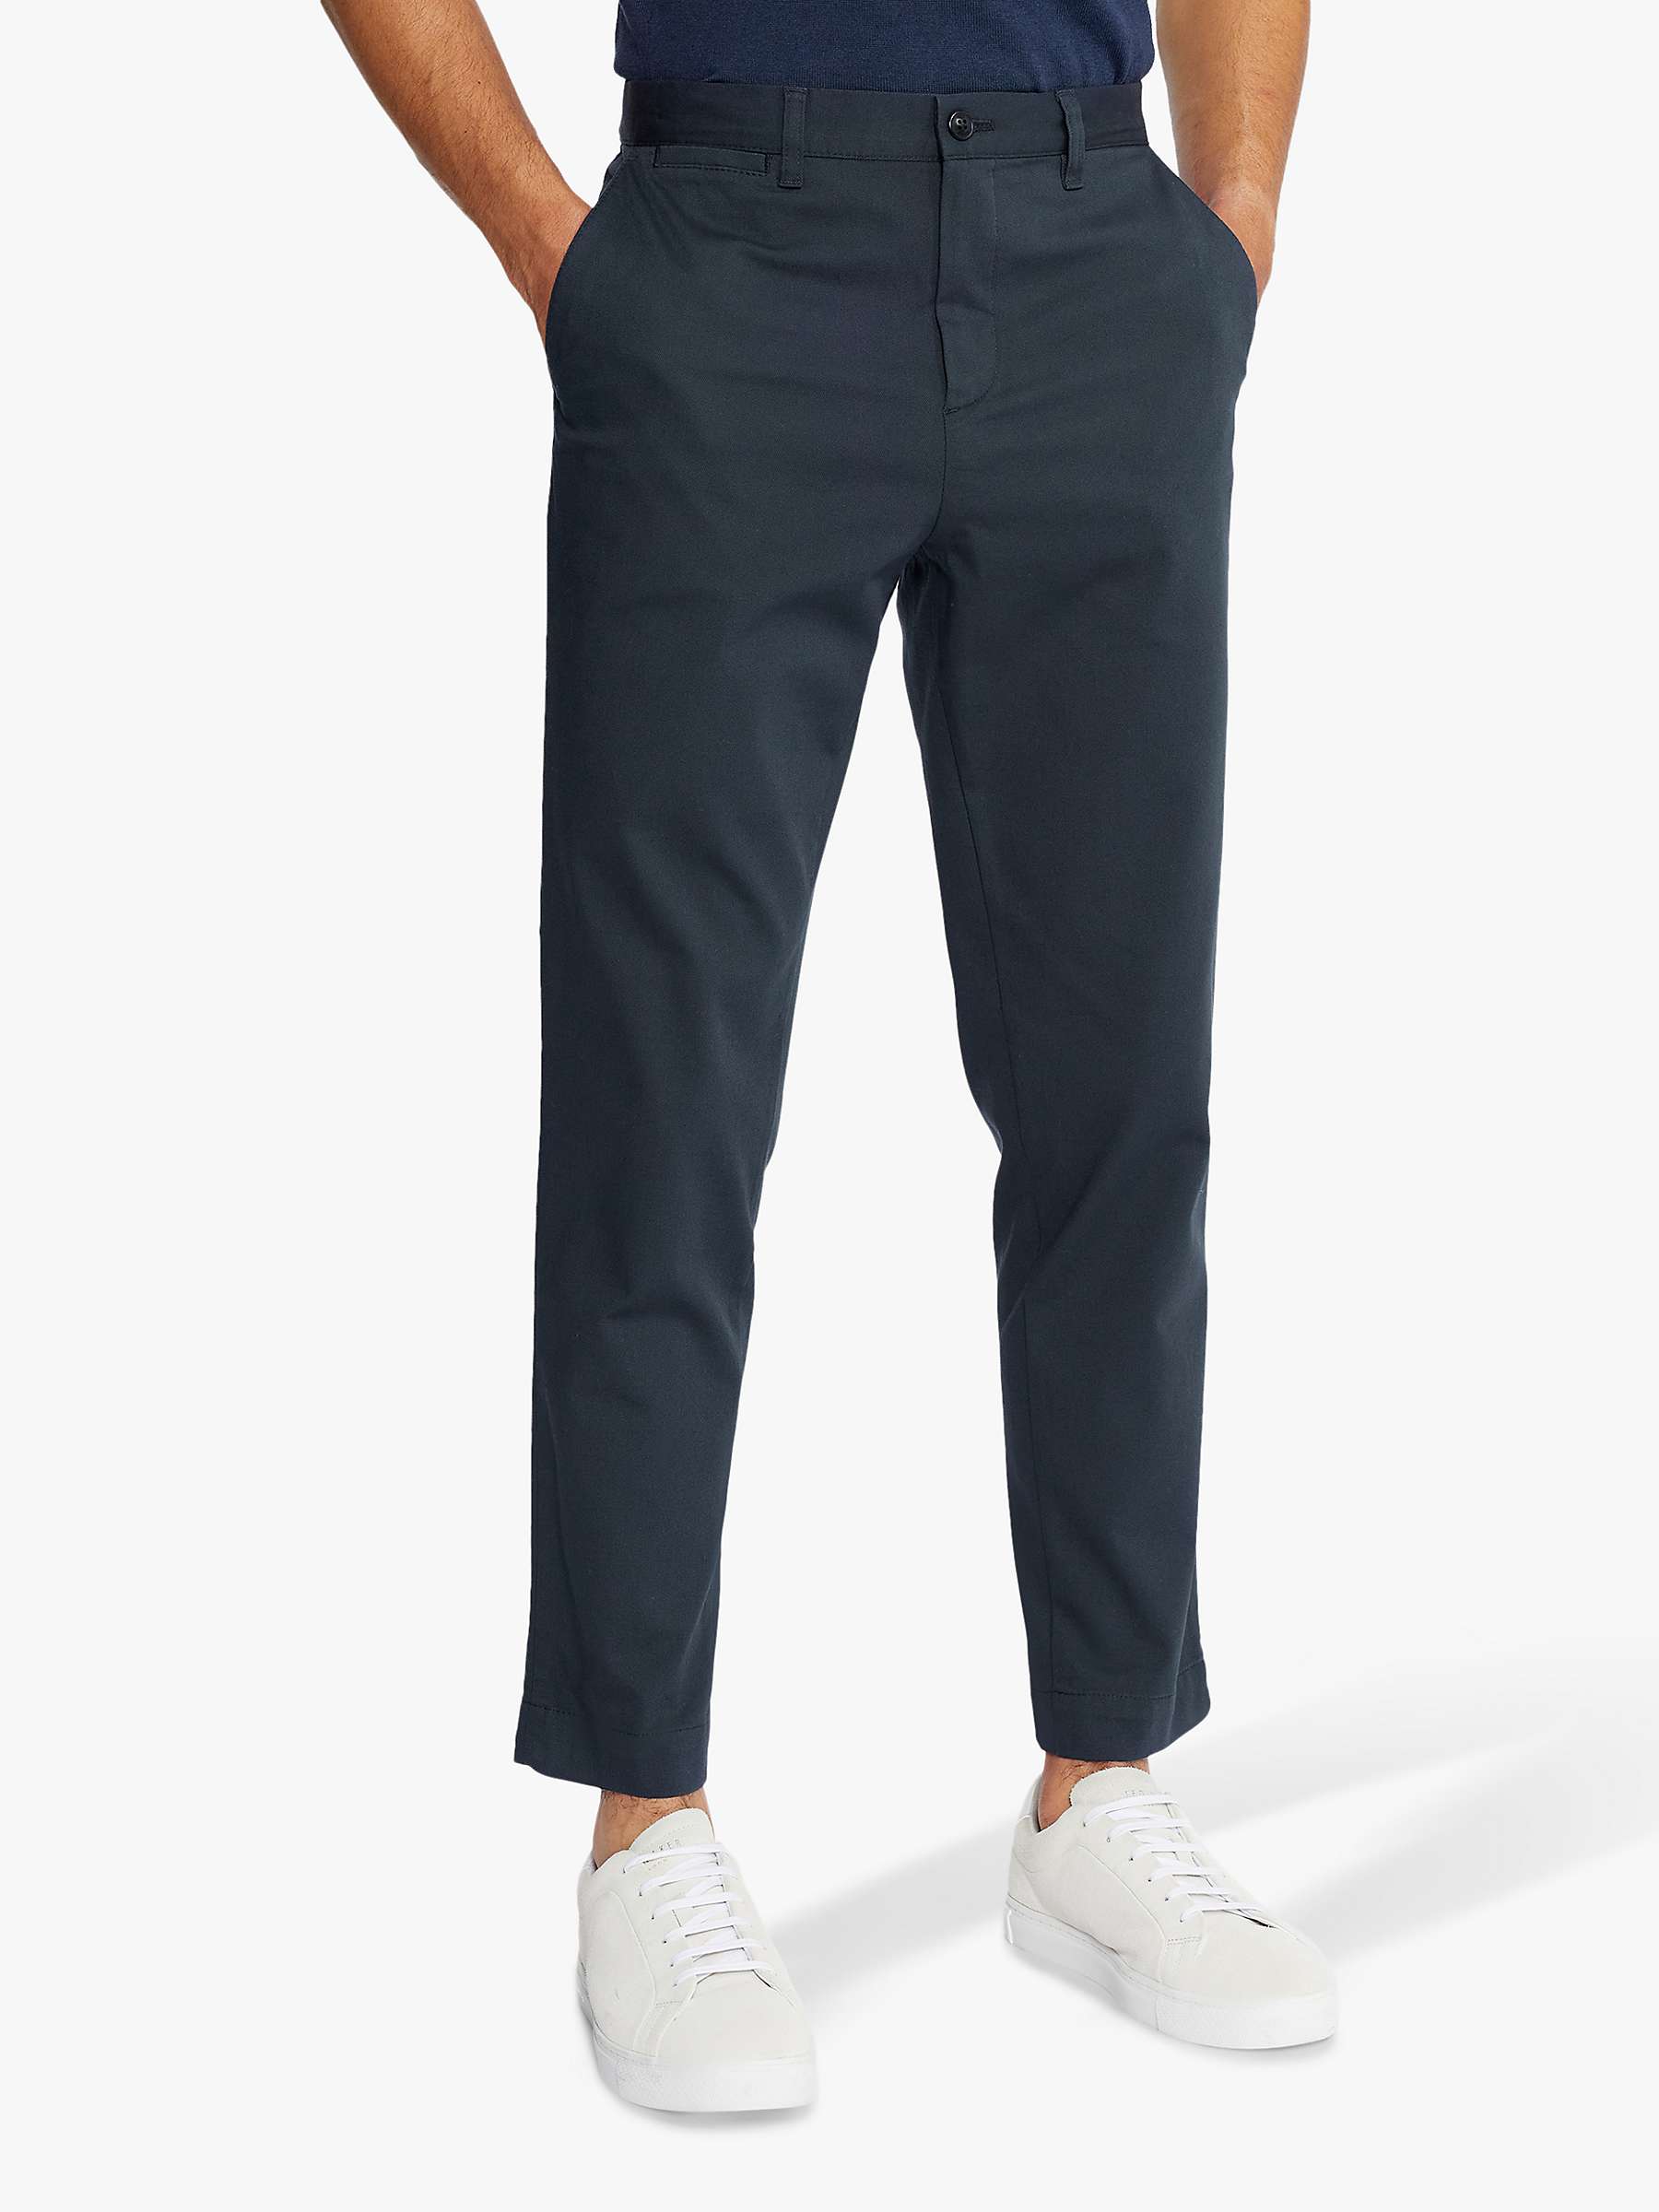 Buy Ted Baker Genbee Casual Chino Trousers, Navy Online at johnlewis.com